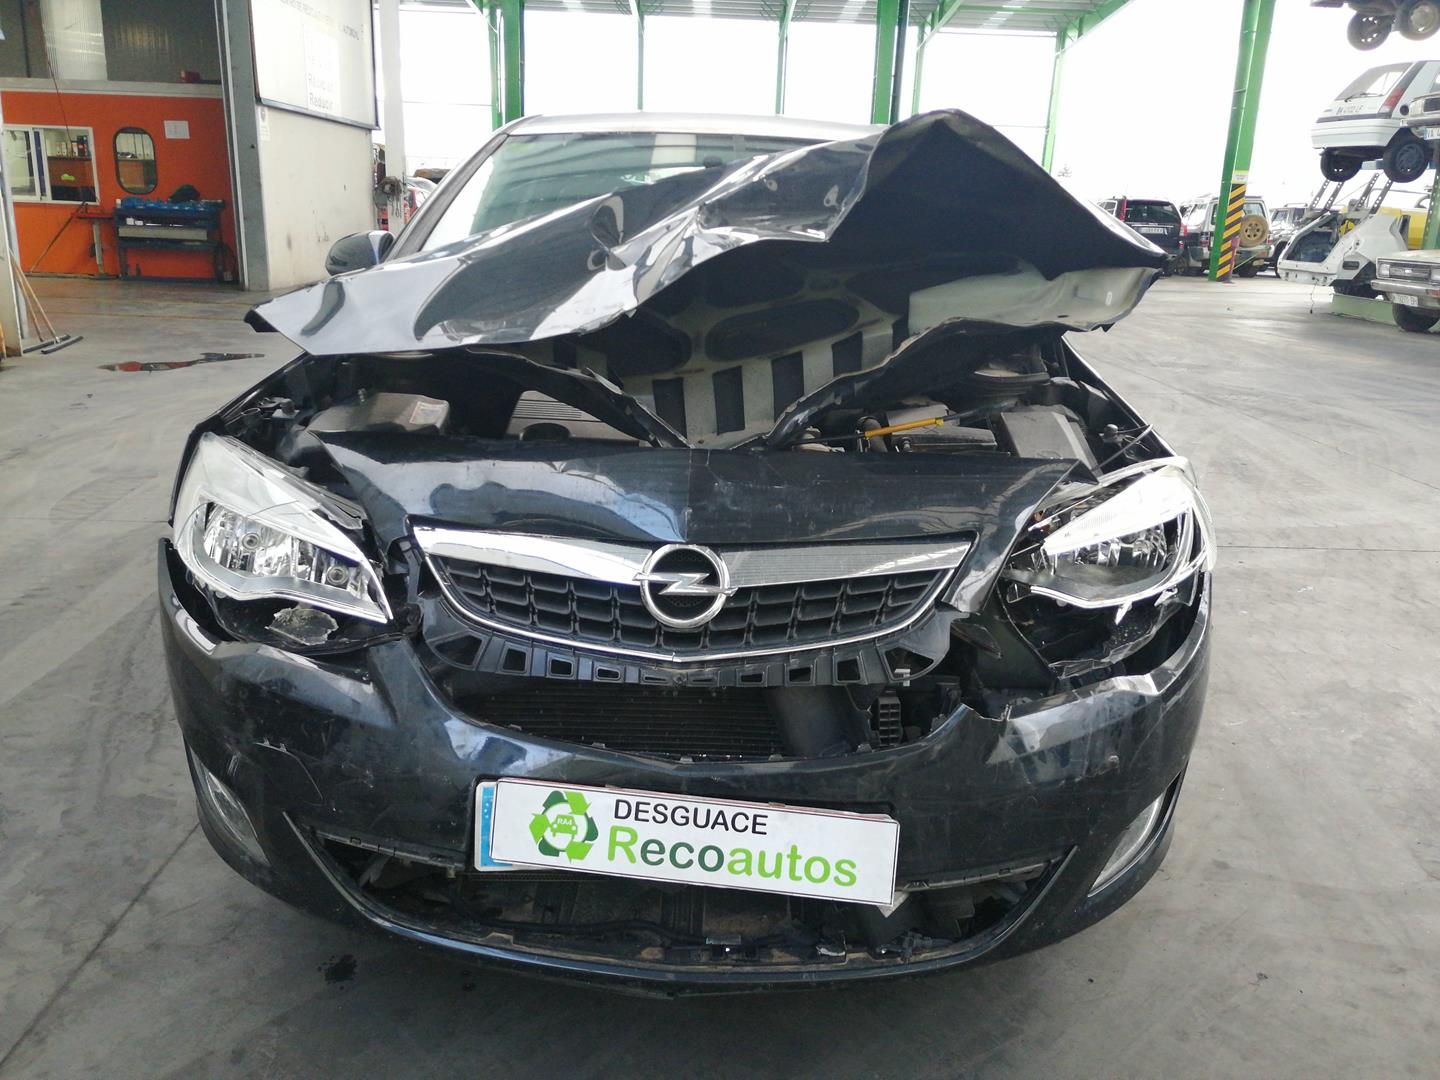 OPEL Astra J (2009-2020) Other Body Parts 13372619, 5PUERTAS 21725106